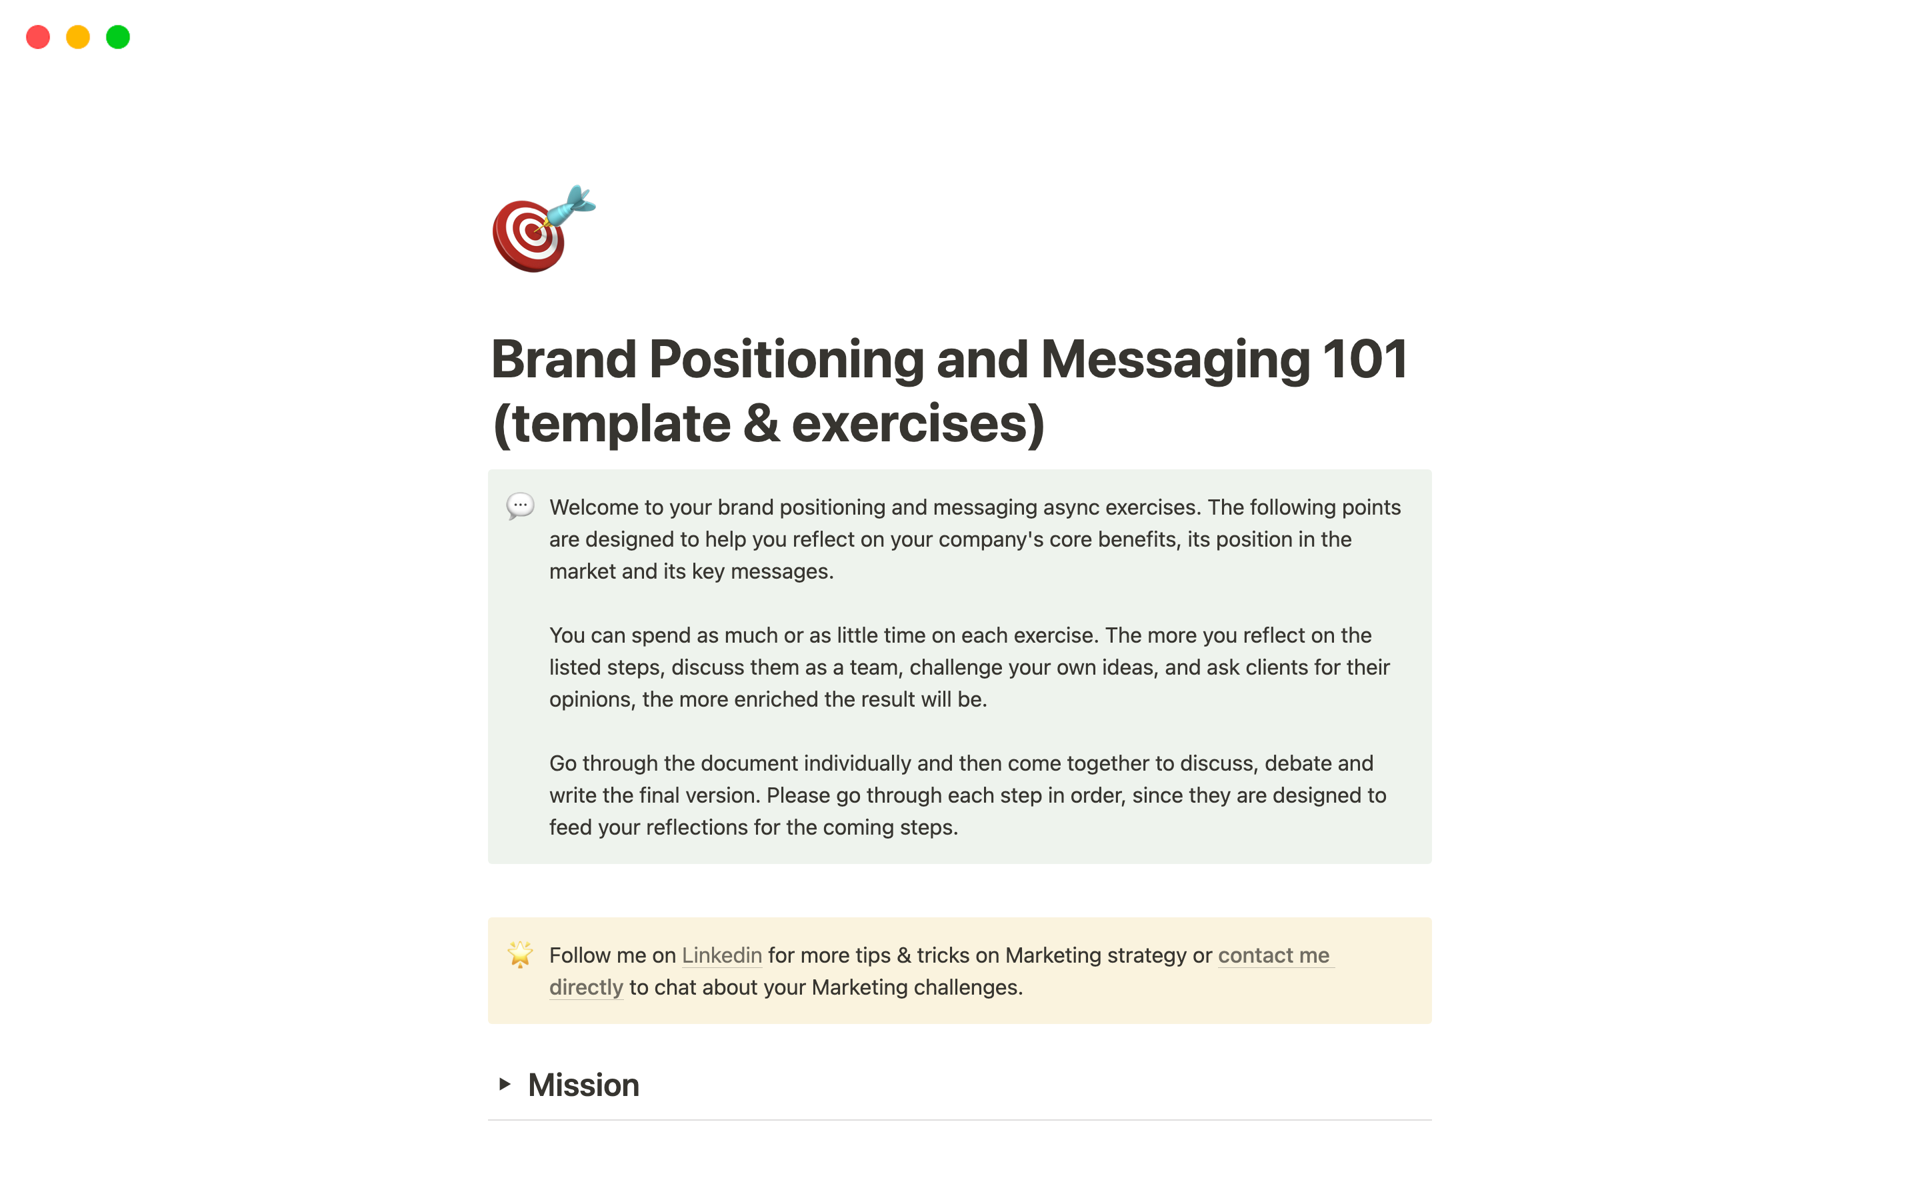 Brand Positioning and Messaging 101 (template & exercises) Notion